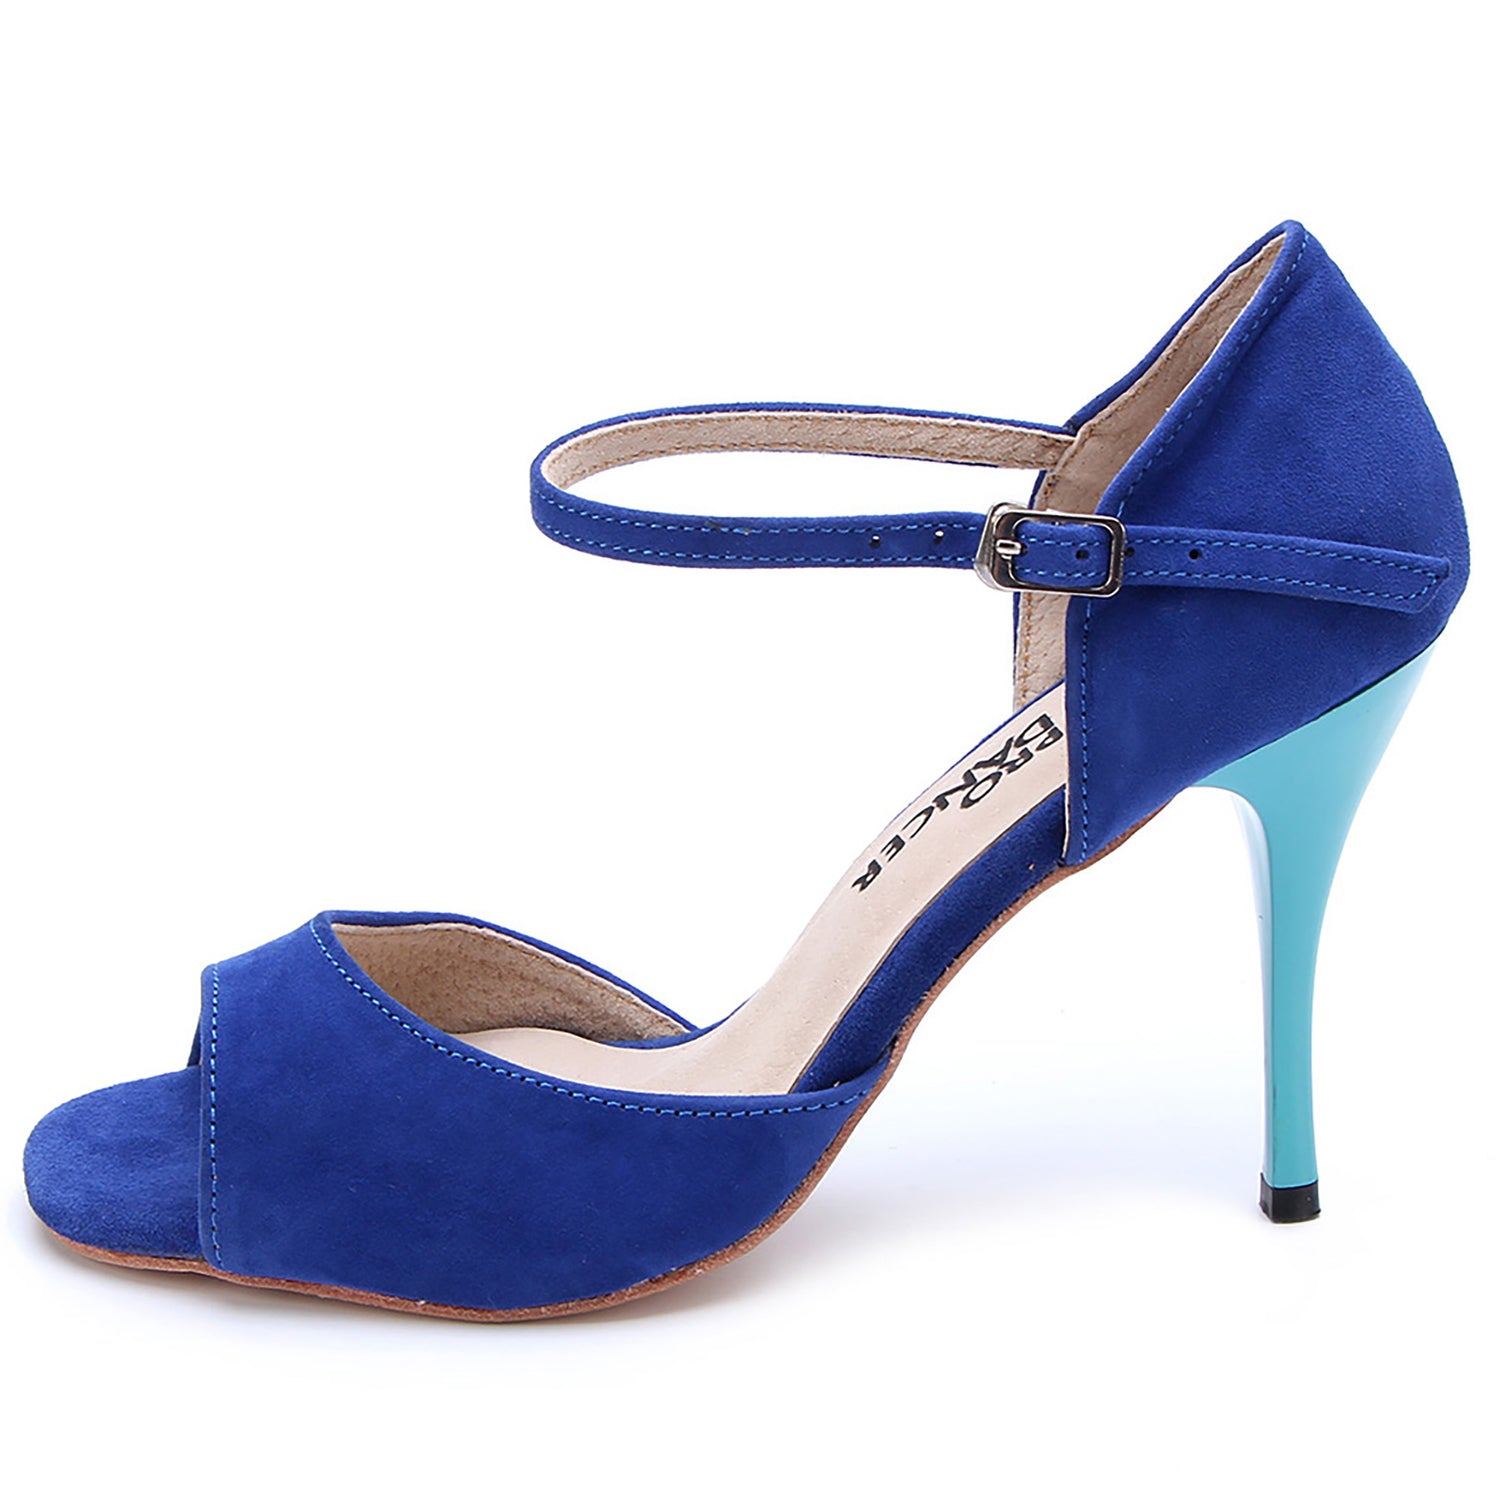 Women's Pro Dancer blue leather high heels for Argentine Tango1